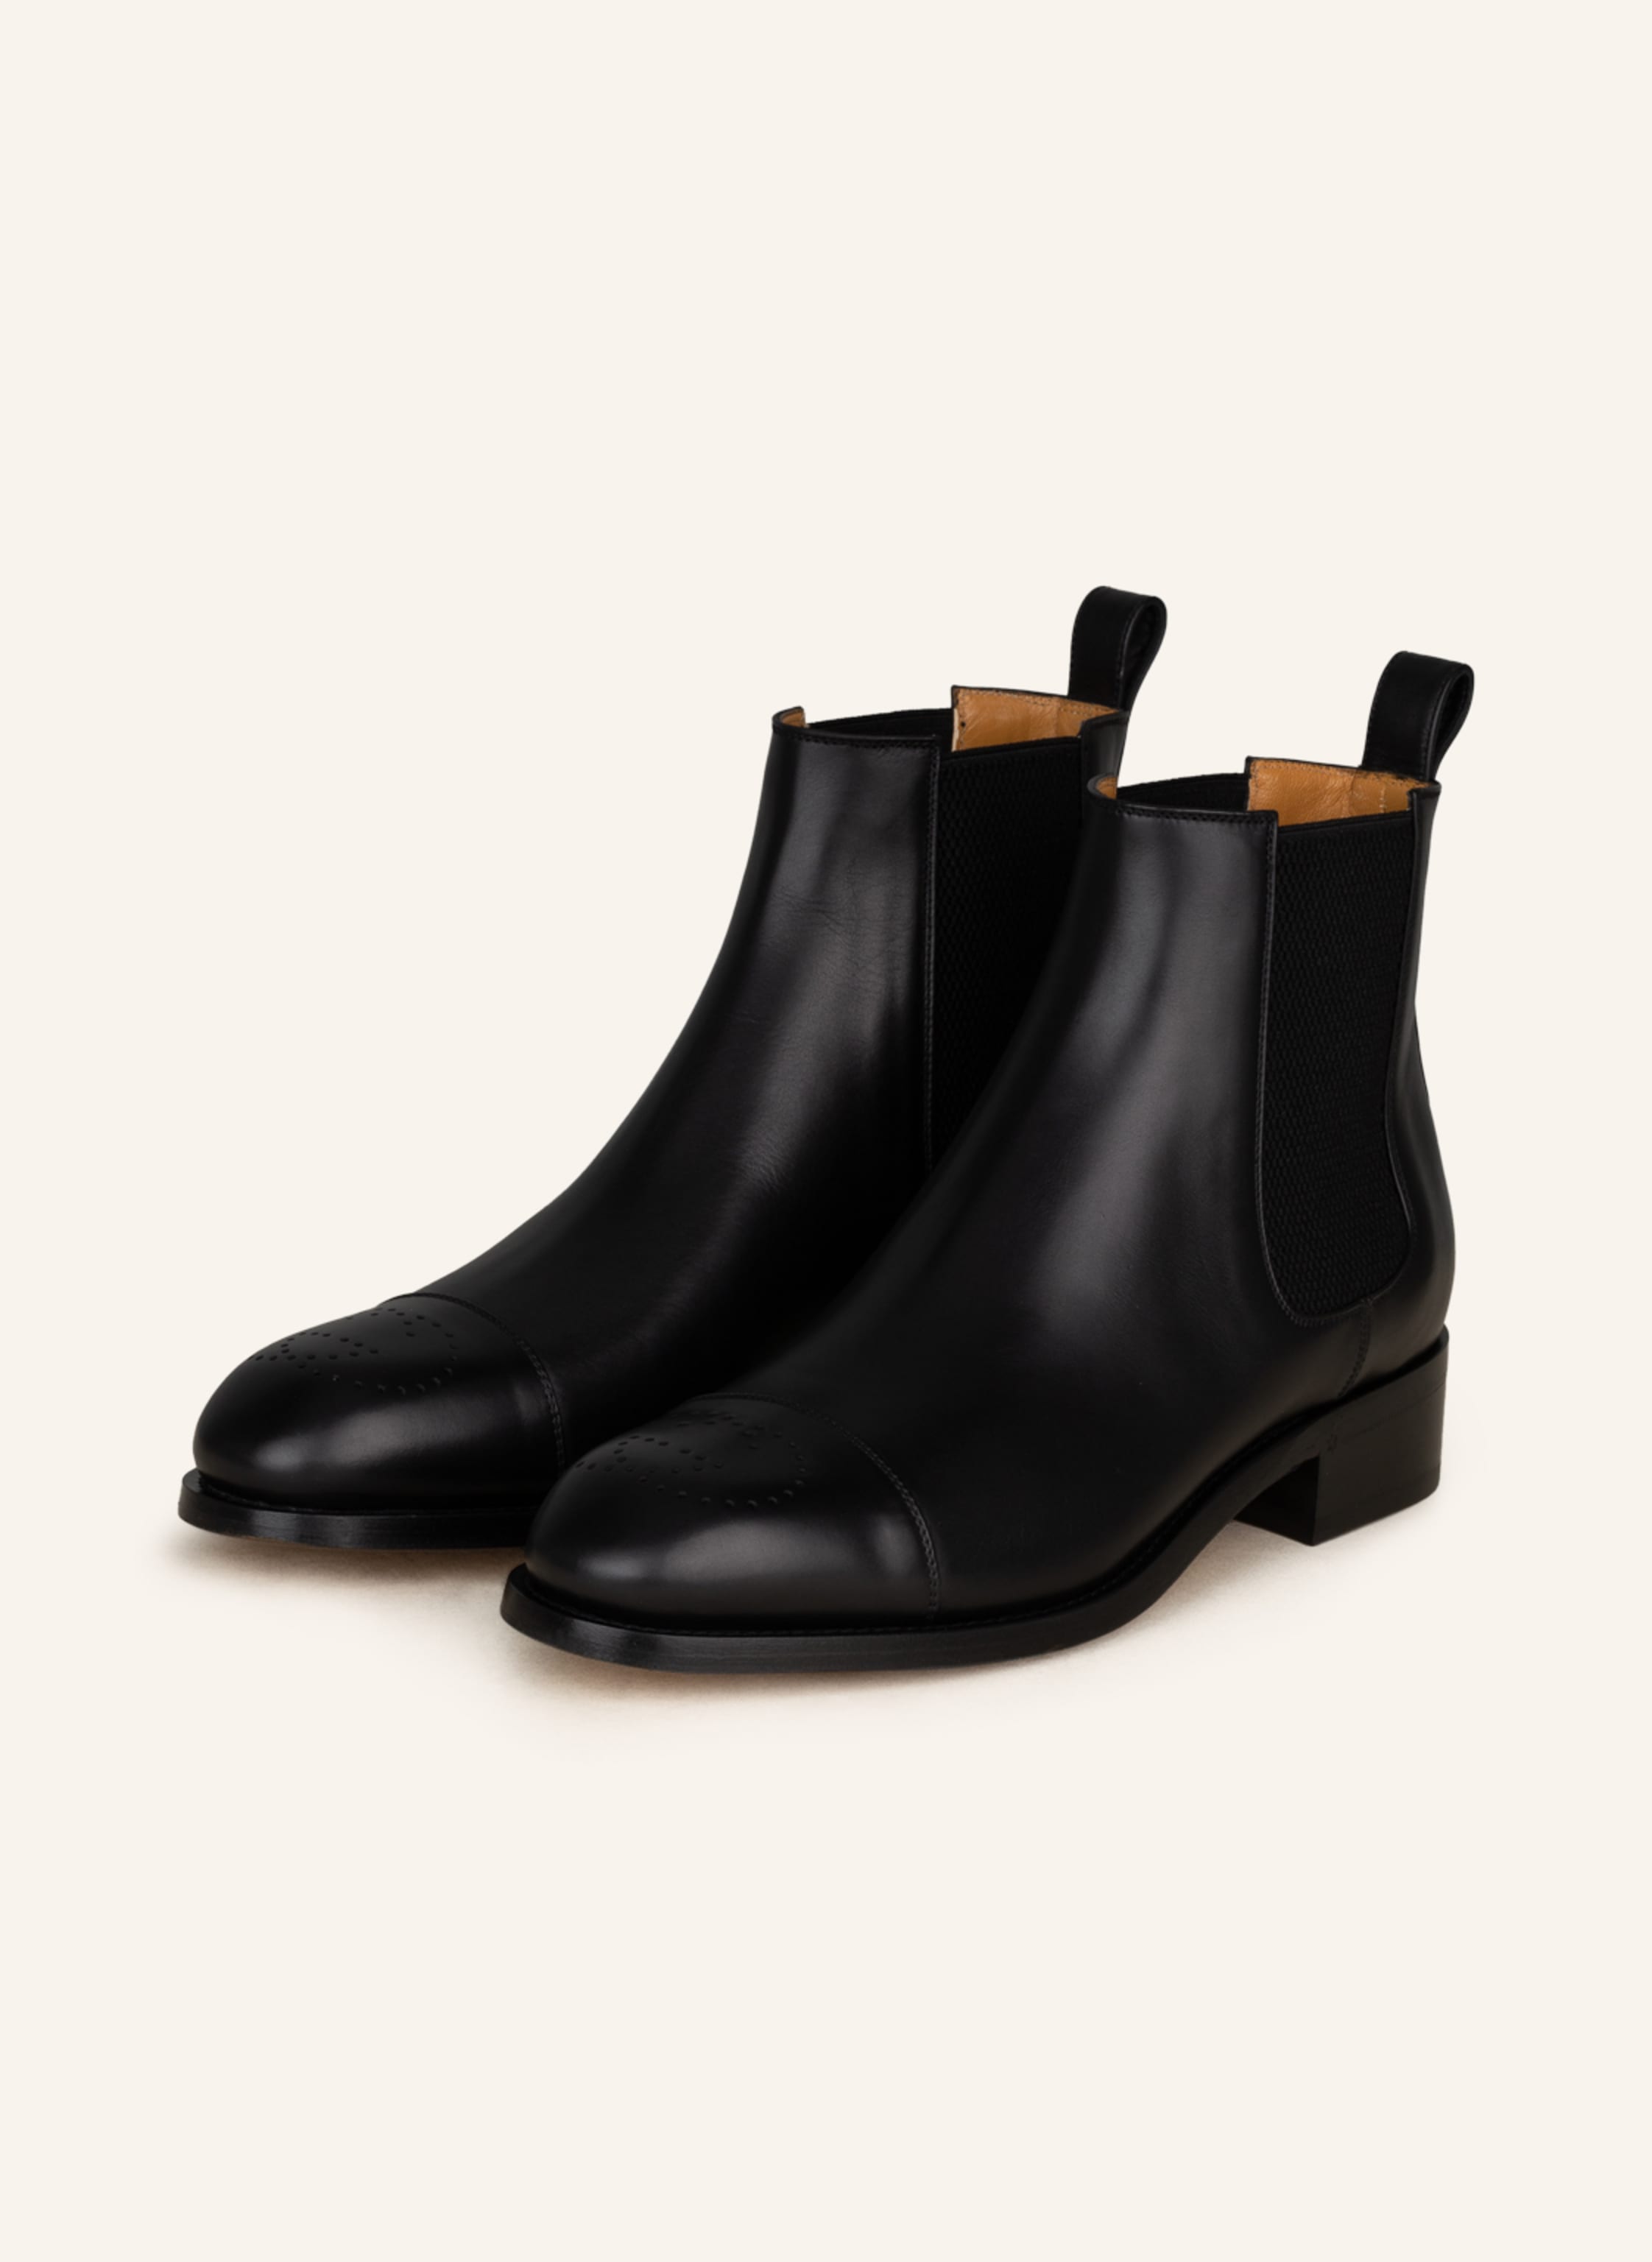 GUCCI boots ZOWIE in 1000 nero/black